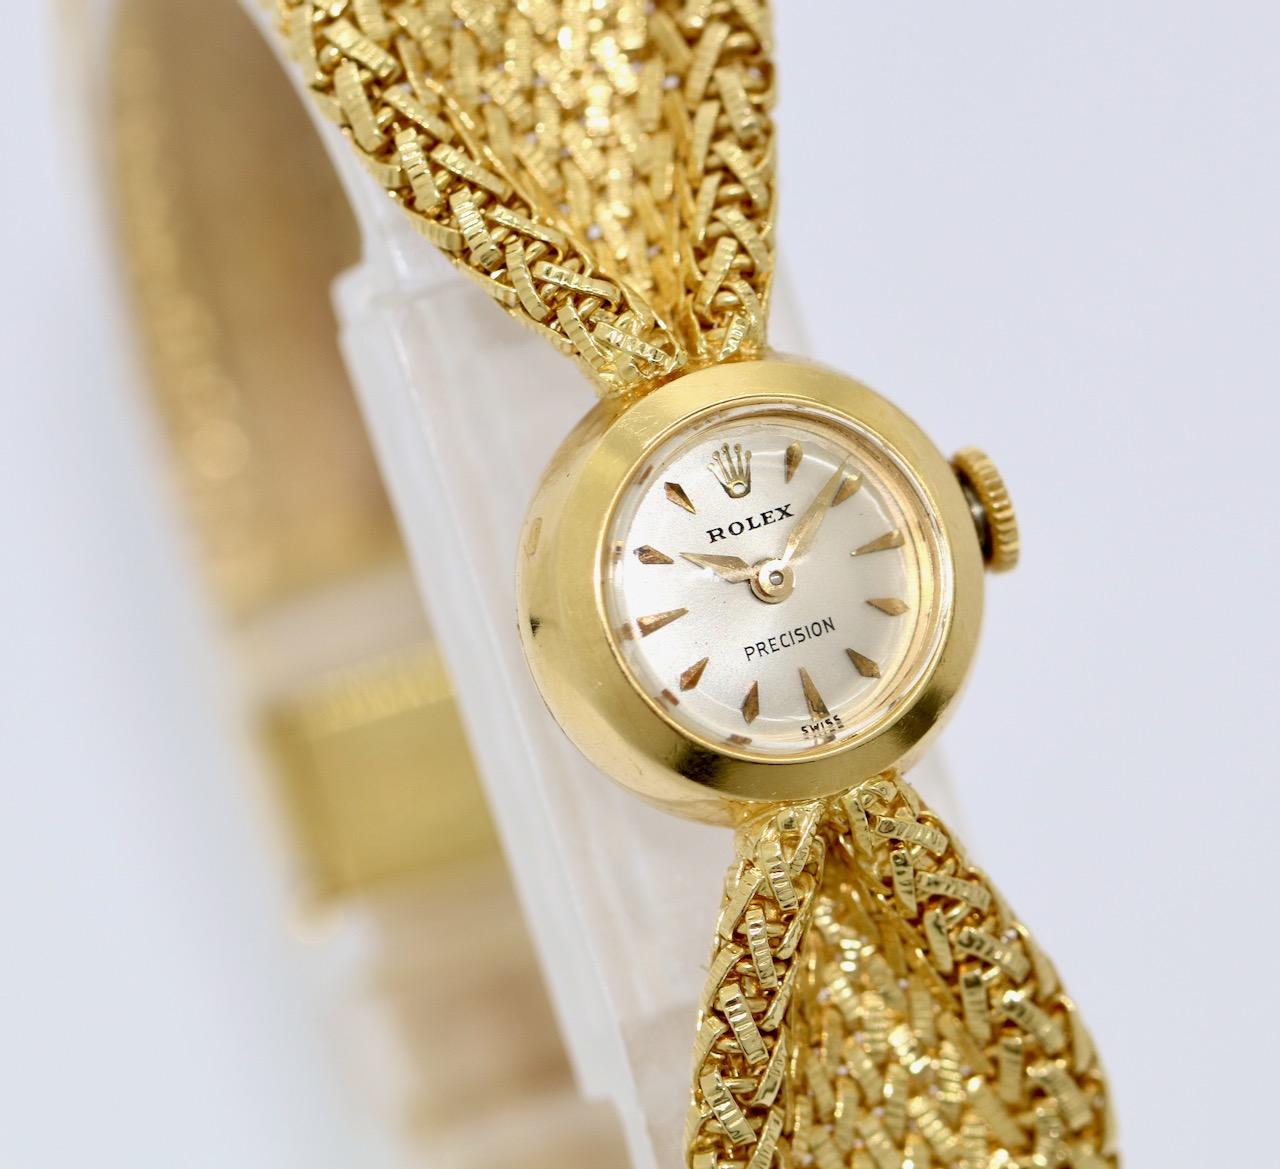 Beautiful and very rare Rolex Precision Bow Vintage Ladies Wrist Watch. Case and Strap 18 Karat Gold. 
Diameter without crown 15mm.
Total length 179mm
Manual winding movement.

Watch works properly. Including certificate of authenticity.